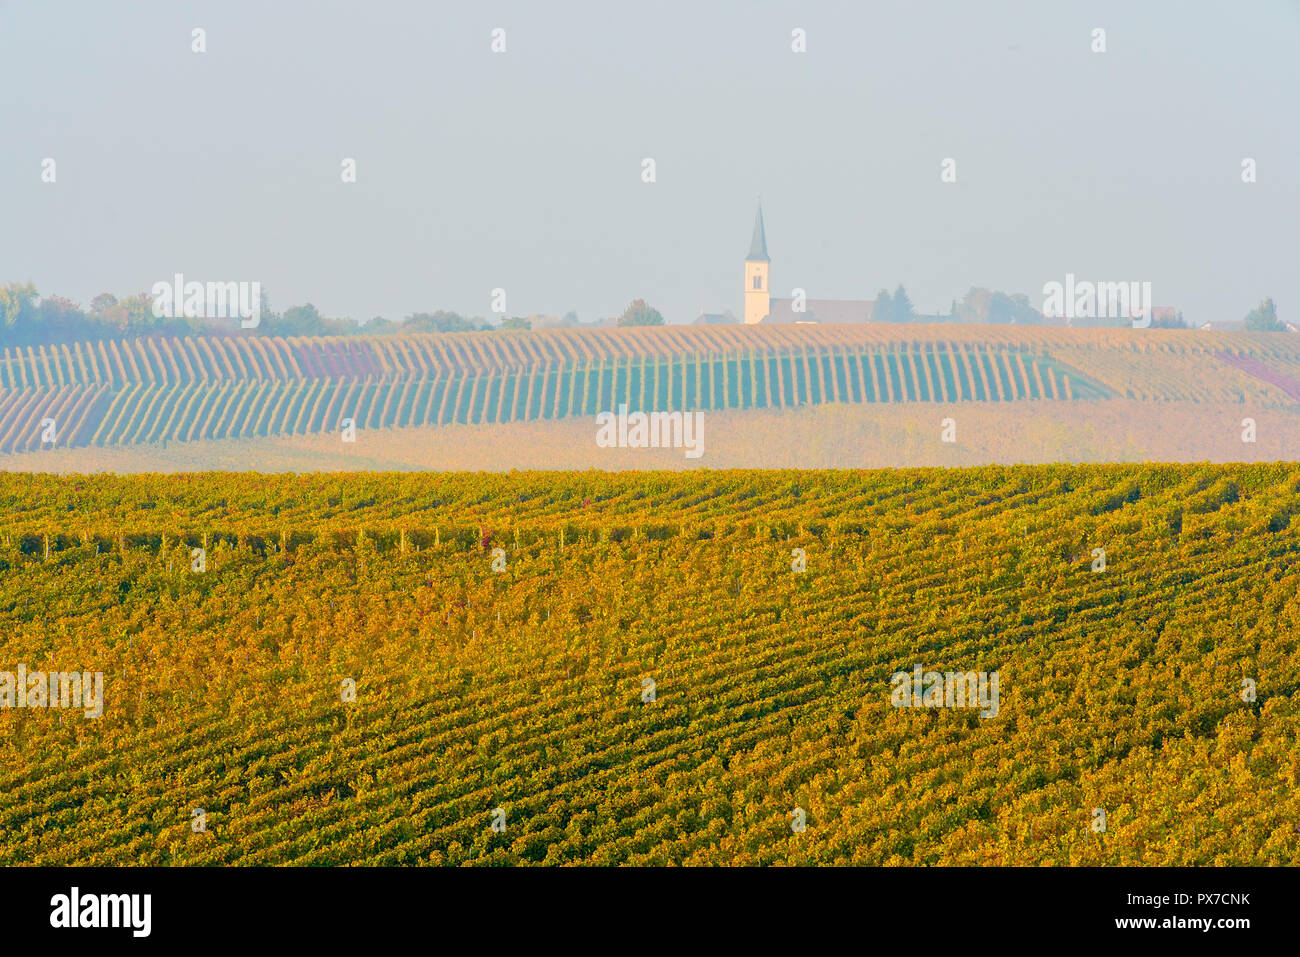 Picturesque vineyards in autumn colors, Grunern village in background, Baden Württemberg, Germany. Stock Photo